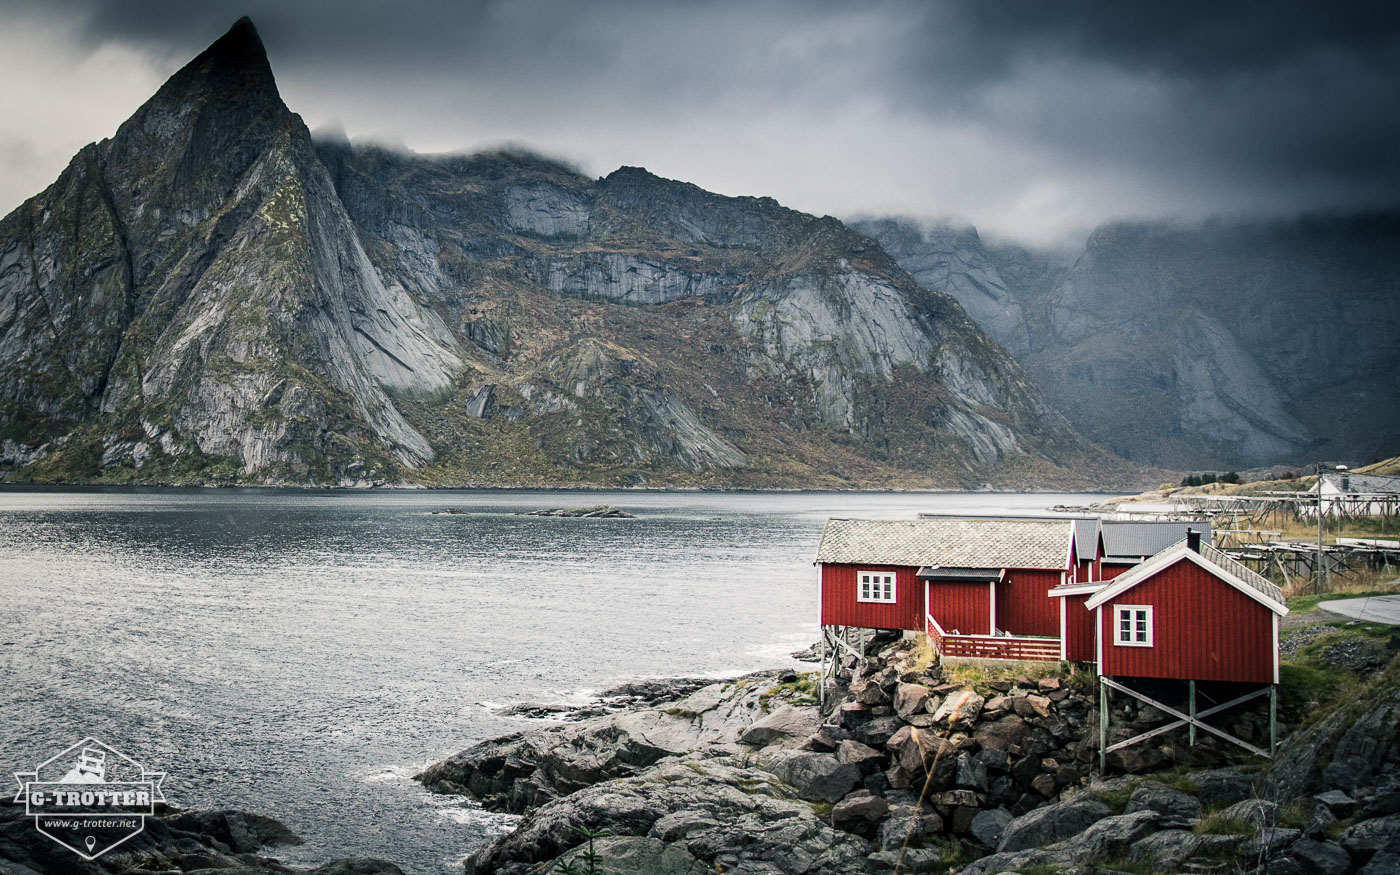 The red fishermen cabins (Rorbuer) are typical for the Lofoten. 